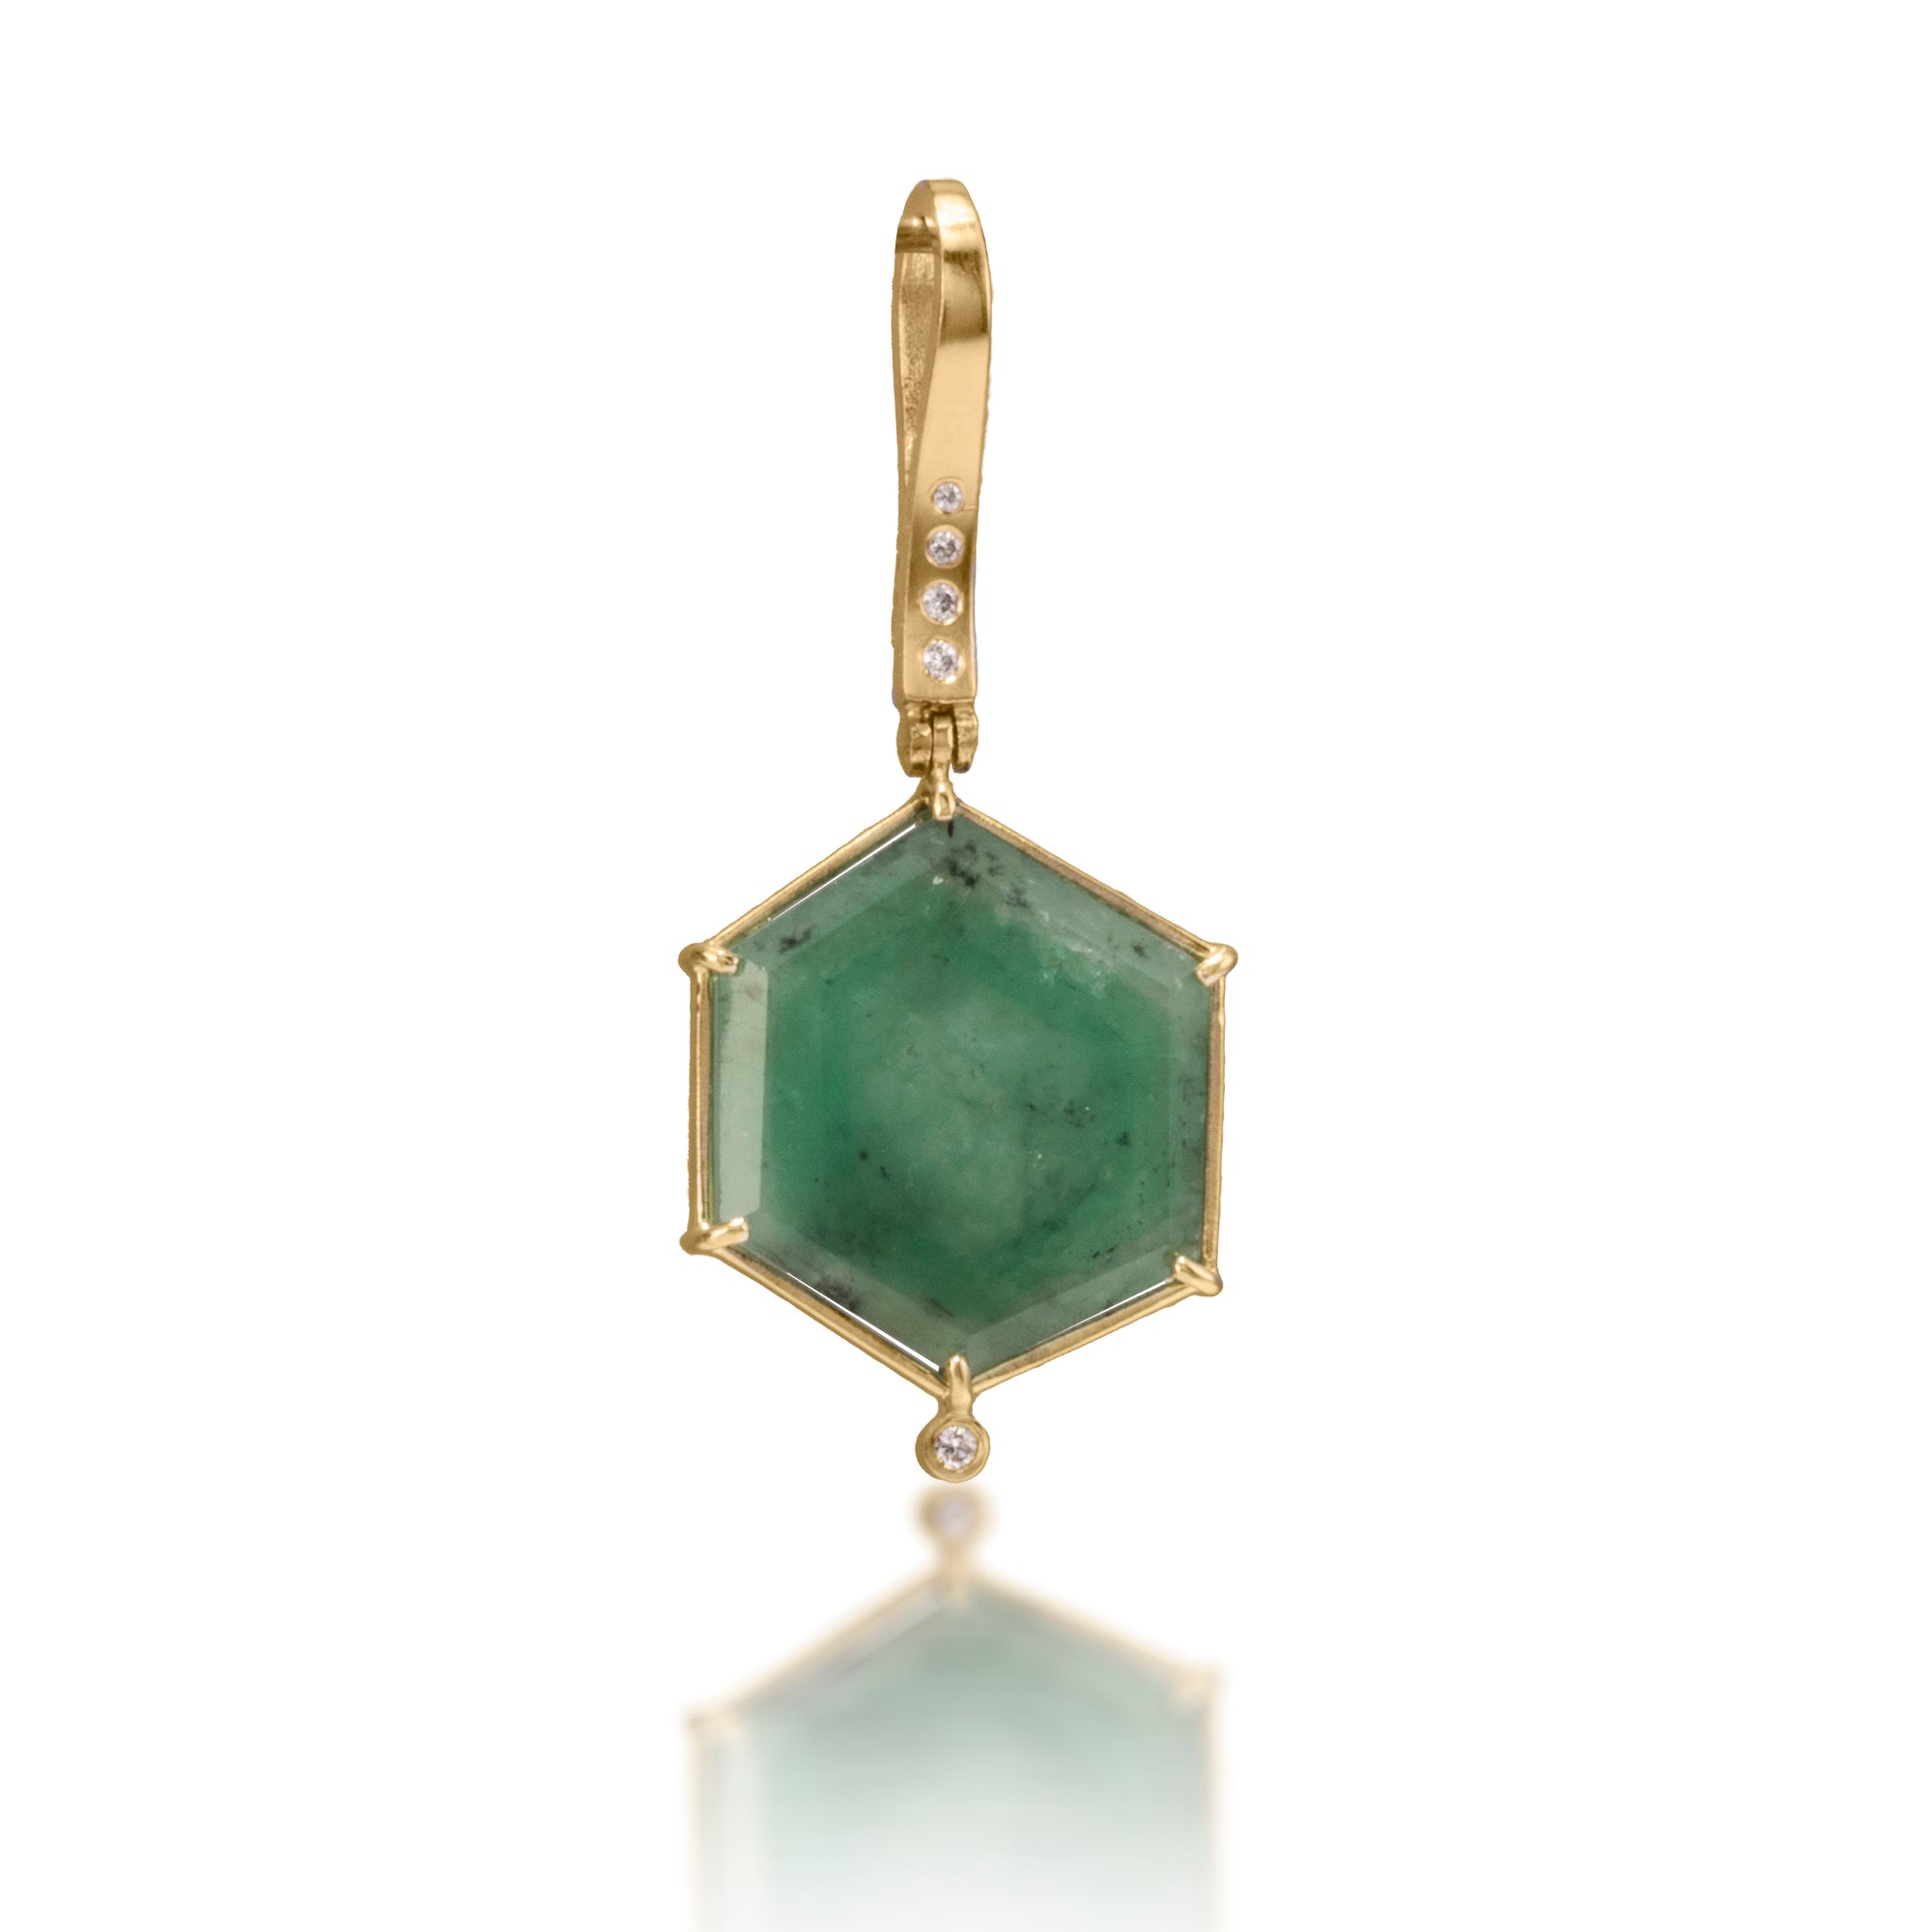 One of a kind pendant featuring 12.83 total carats natural emerald hexagon prong set in 18k and hinged from a delicate 18k gold bail set with 4 white diamonds. Diamond tcw. 0.06.